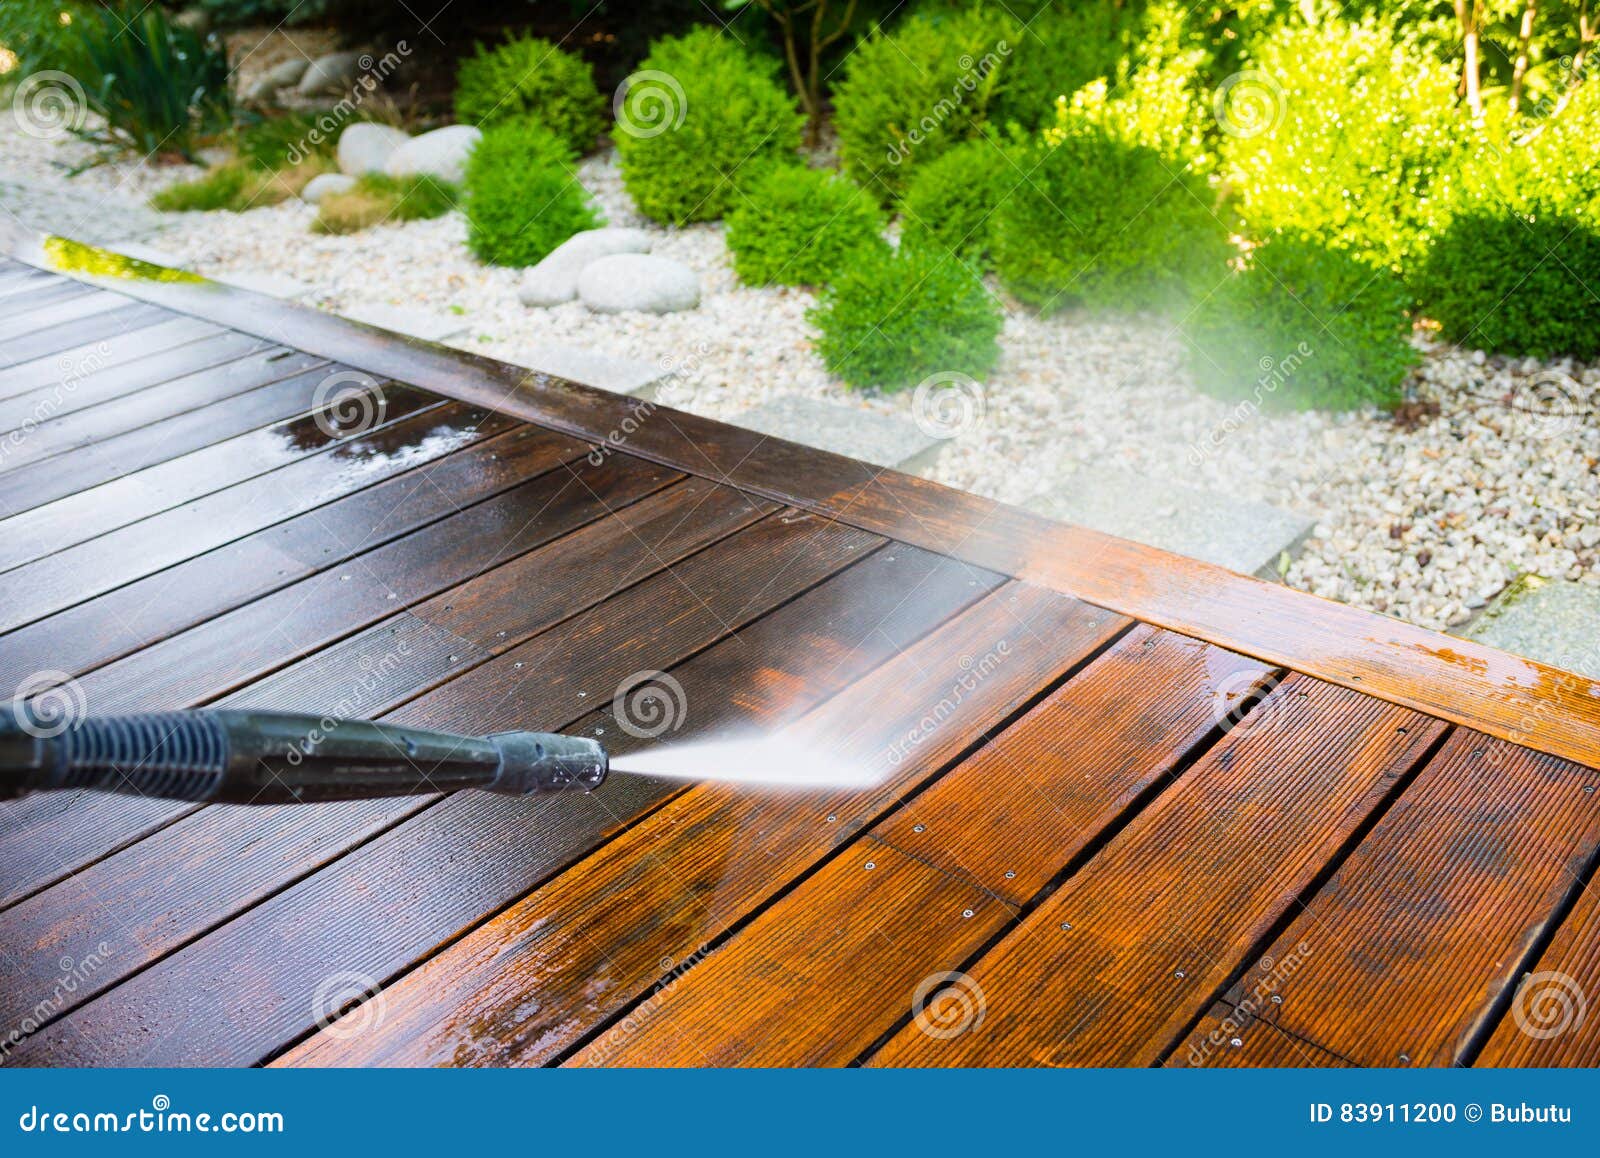 cleaning terrace with a power washer